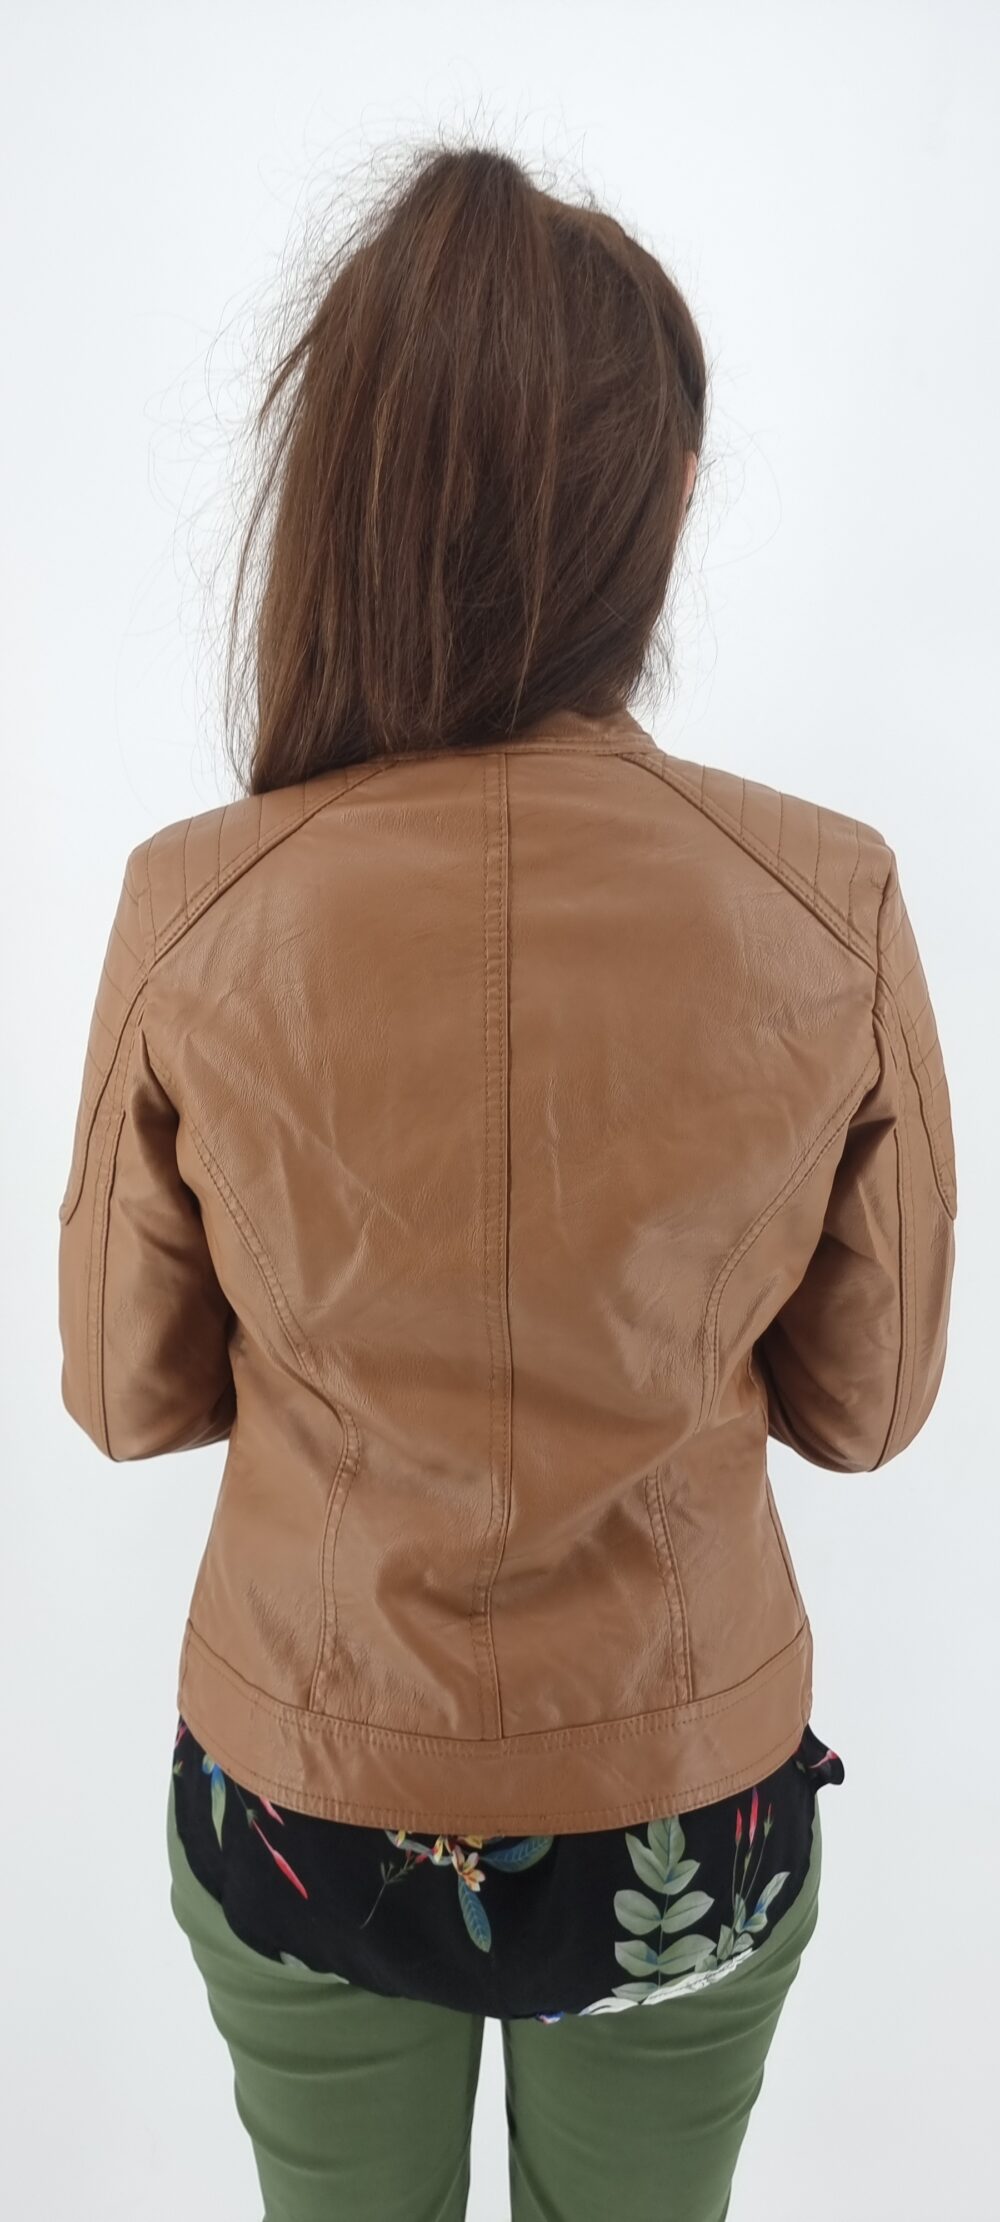 Tampa leather jacket